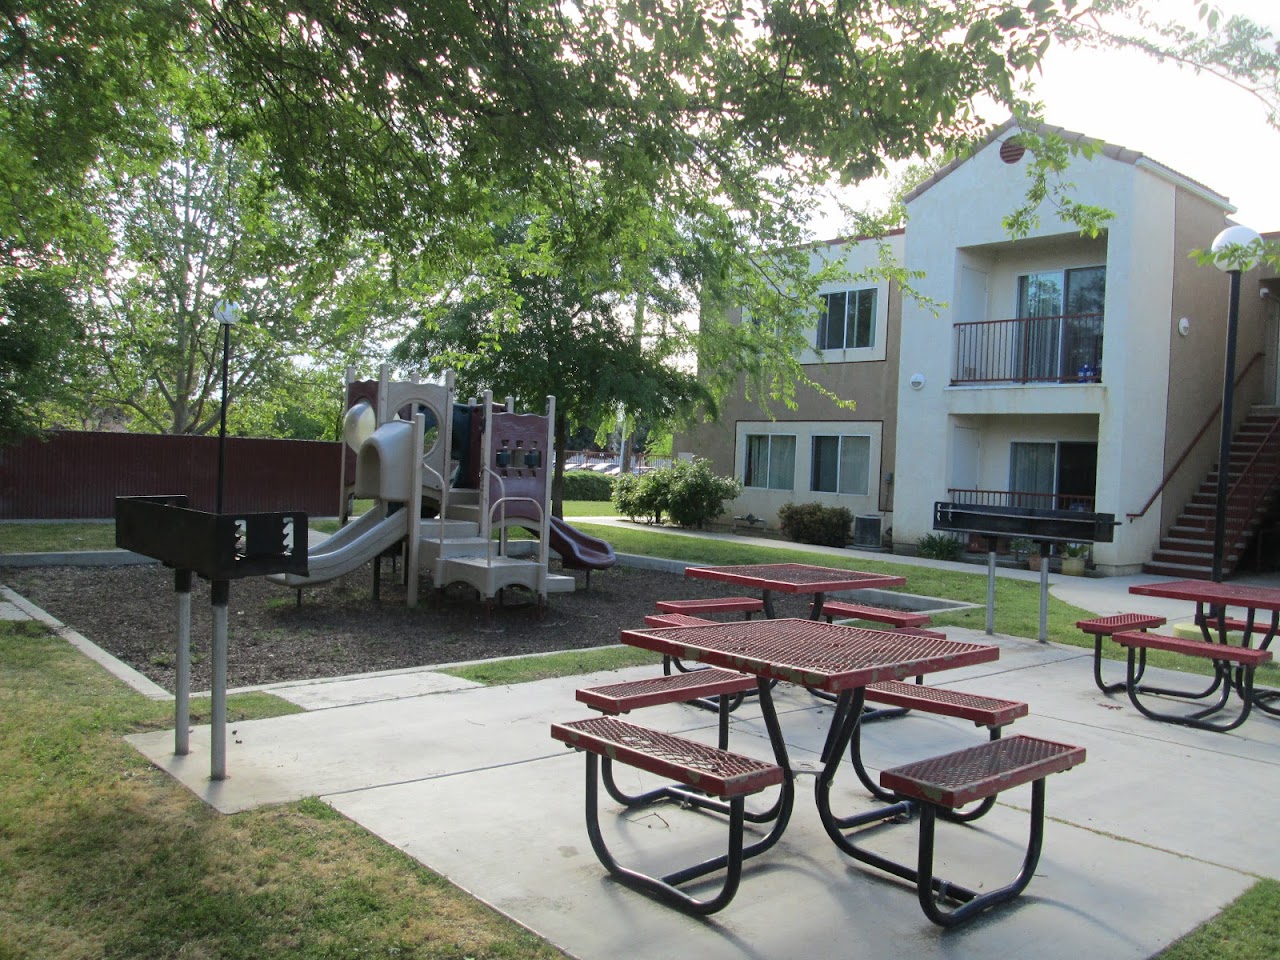 Photo of HOOD STREET FAMILY APTS. Affordable housing located at 1400 HOOD ST ARVIN, CA 93203